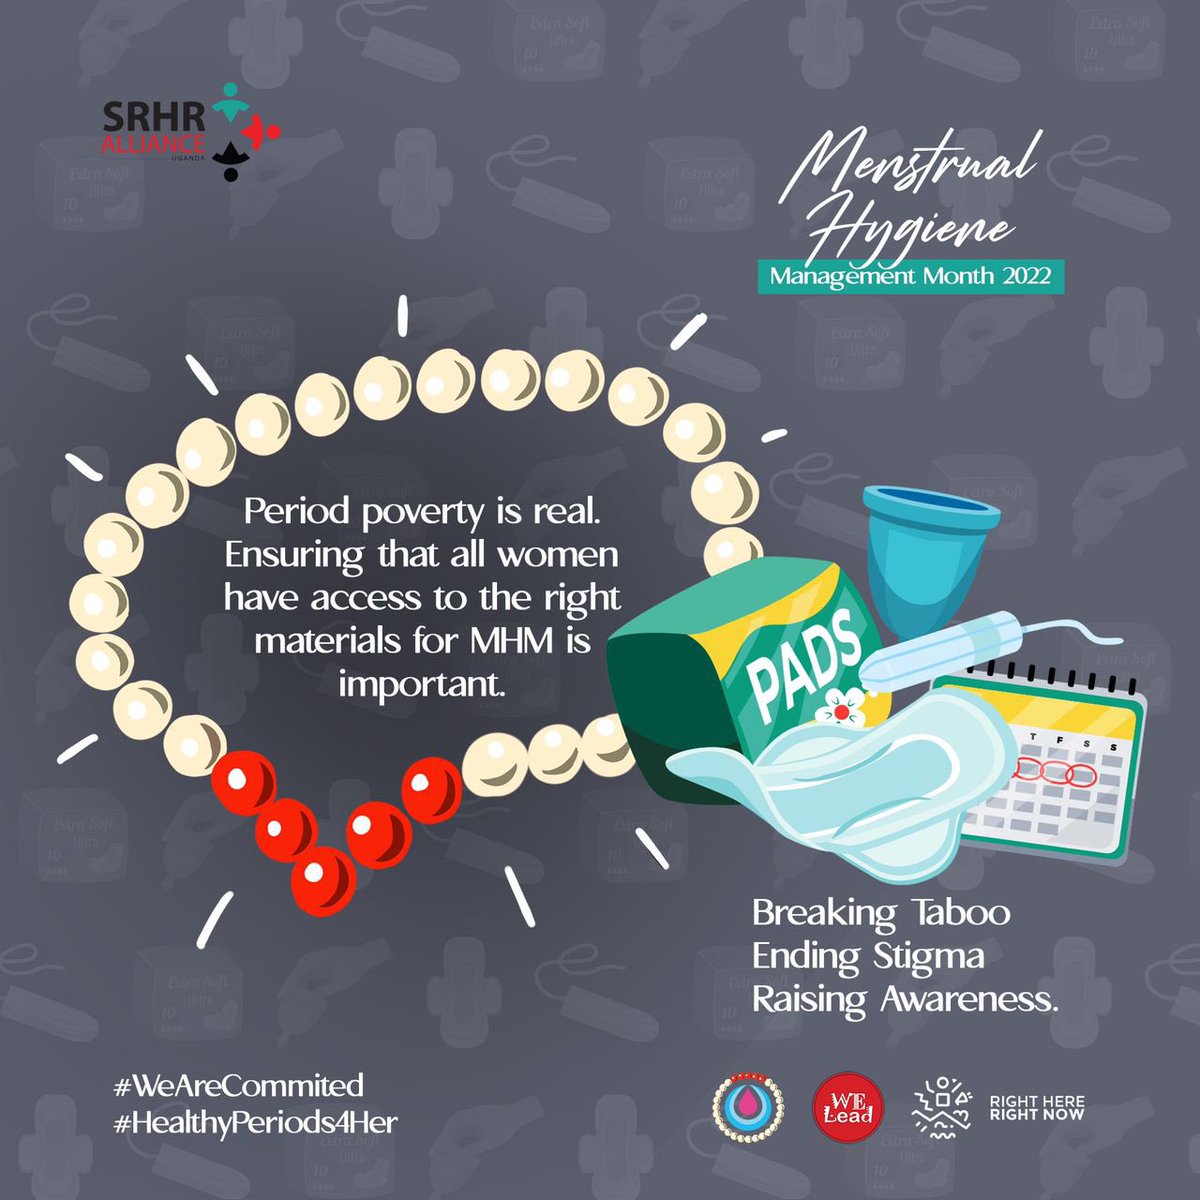 Period poverty is inadequate access to menstrual health care and sanitation, as well as the stigma and shame surrounding menstruation that prevents menstruating women from fully participating in society.
#WeAreCommitted 
#HealthyPeriod4Her 
#WeLeadOurSRHR